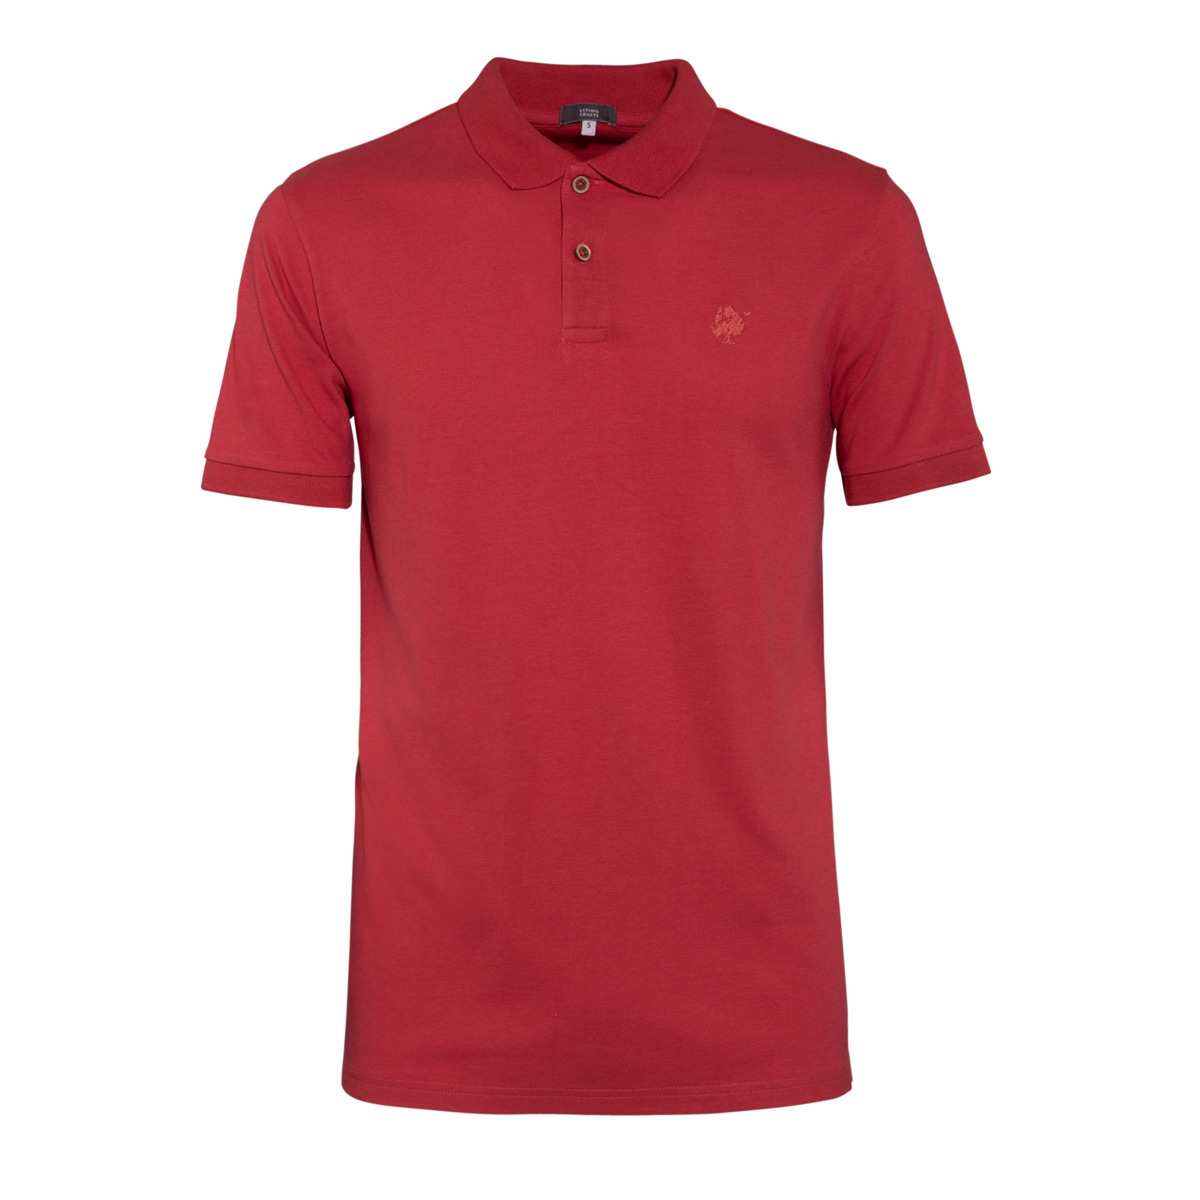 Red Polo shirt, KENLEY